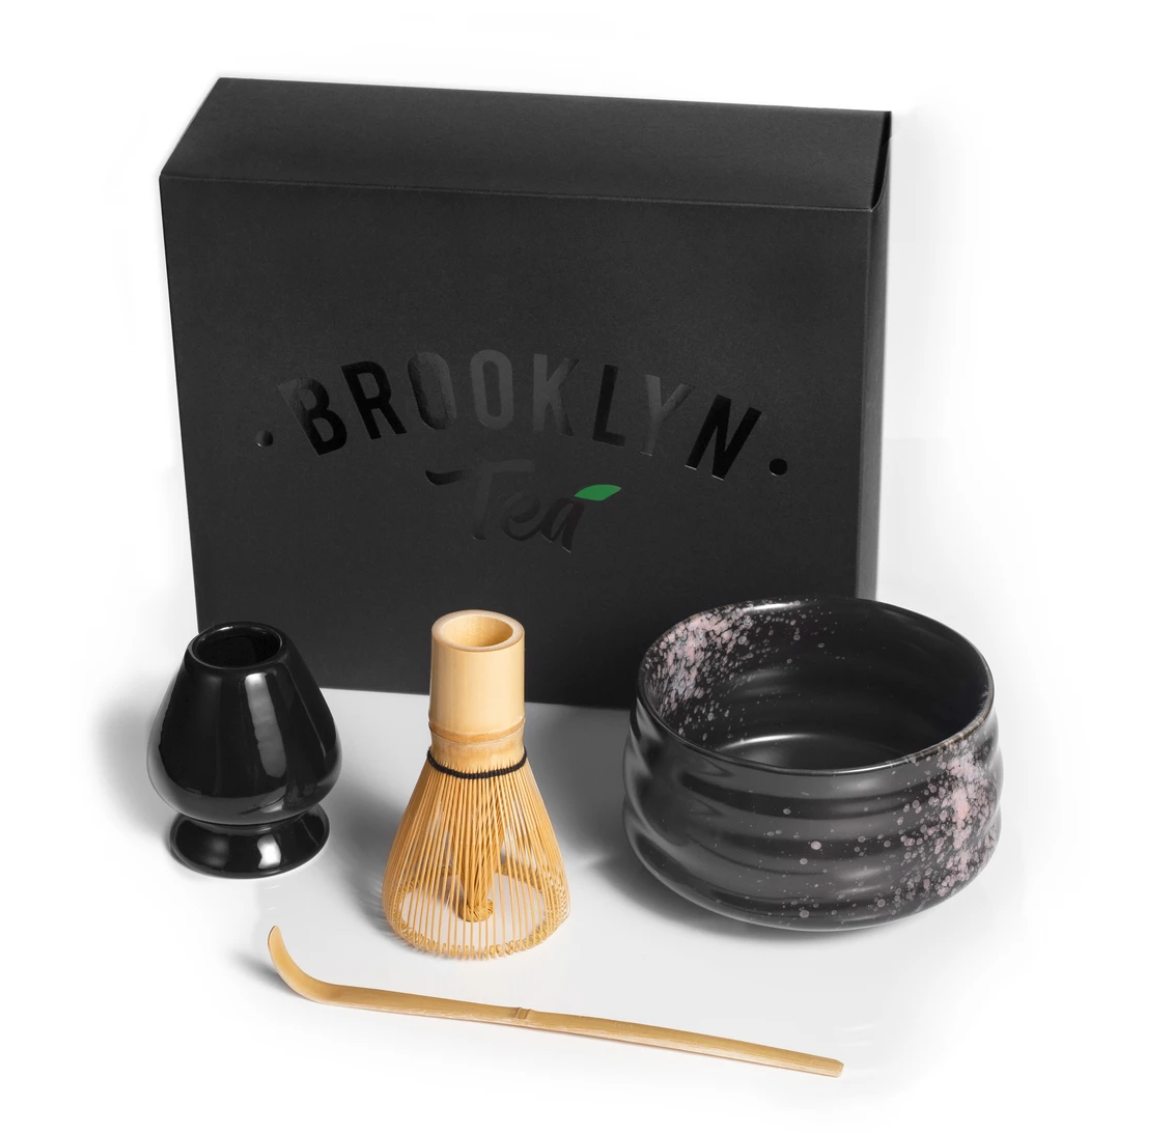 Warm Up Your Holiday Shopping List With A Gift From Brooklyn Tea